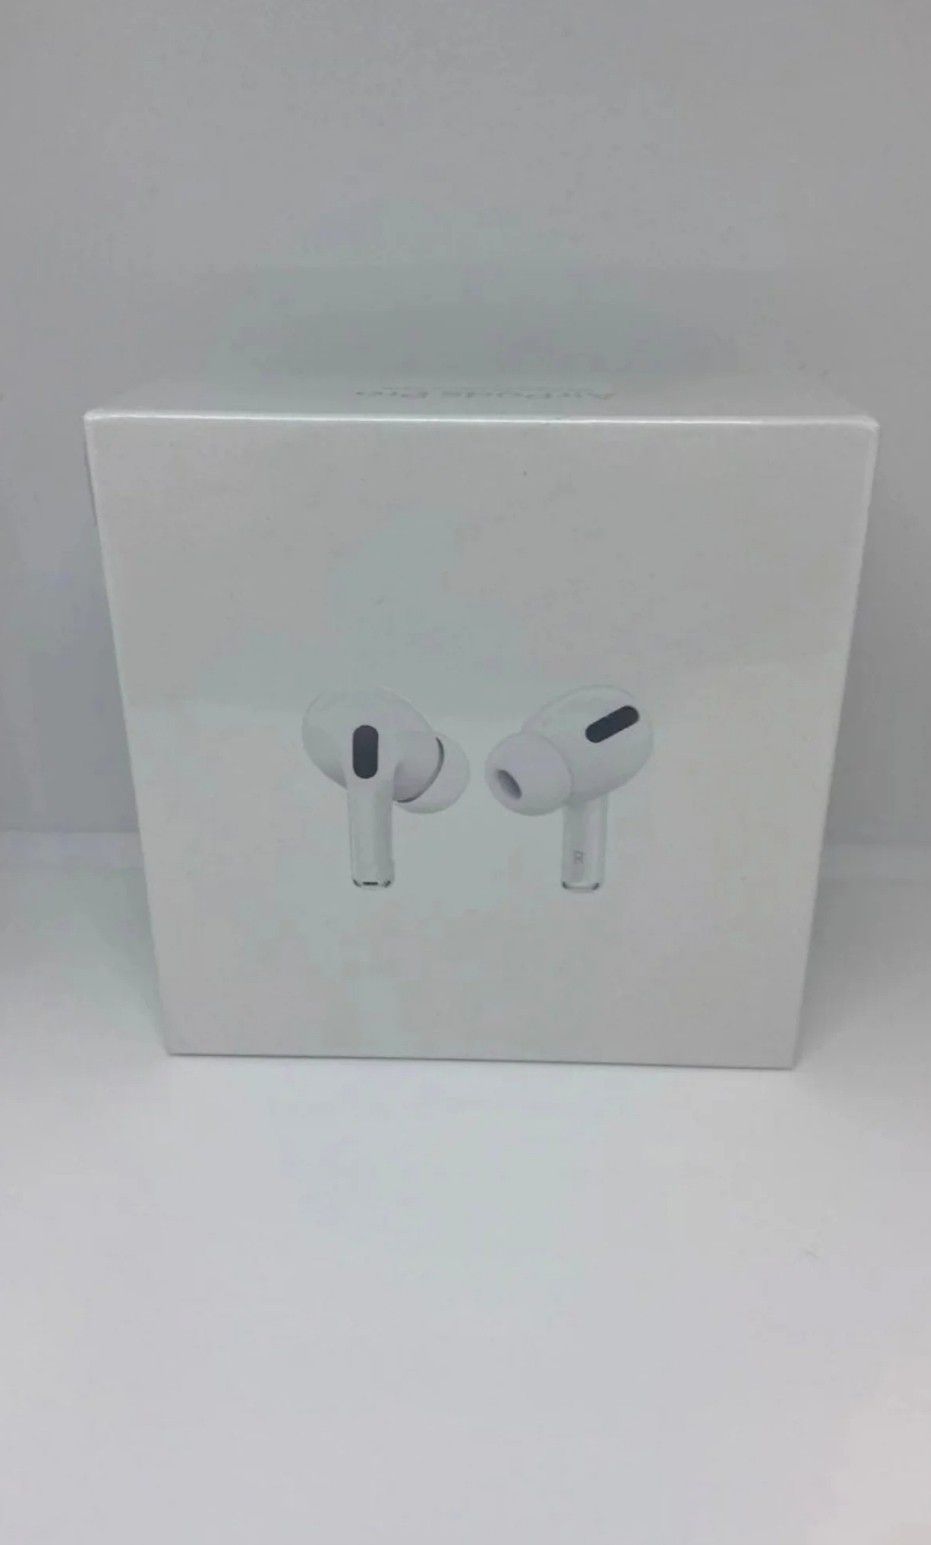 Apple Airpods Pro Earbuds Refurbished